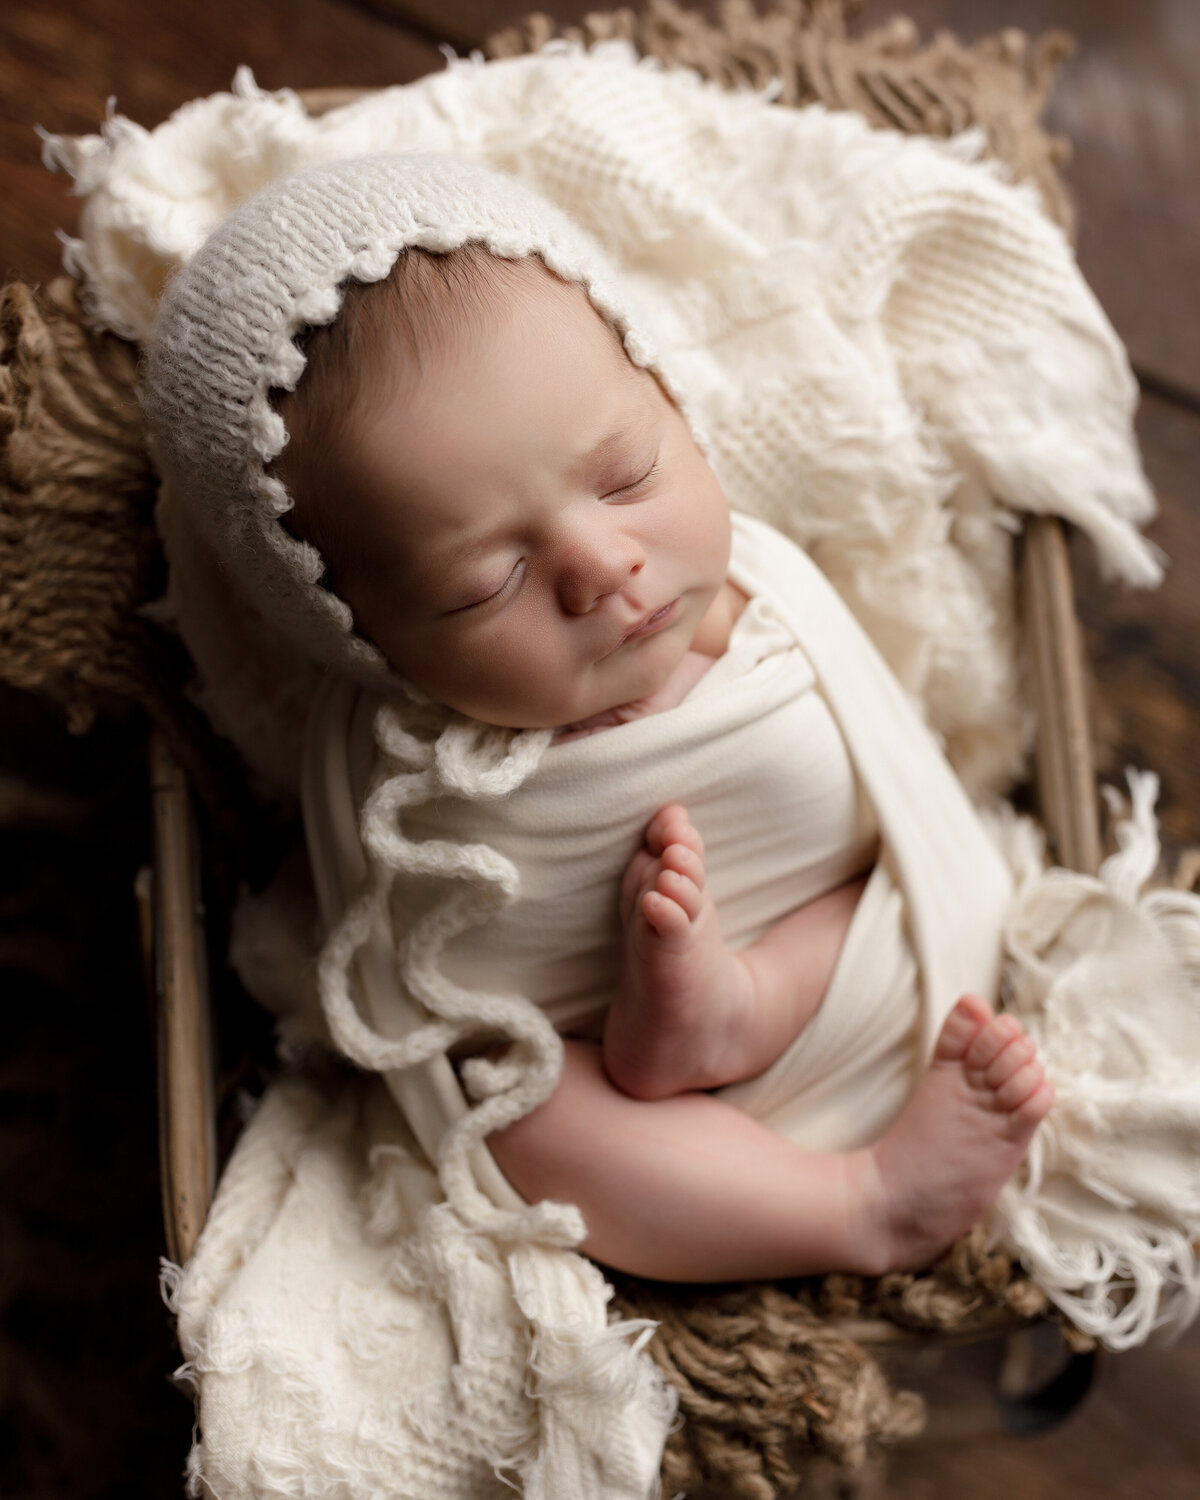 Newborn Photos in top West Palm Beach Photography Studio - Baby girl is wrapped in a cream coloured stretchy swaddle with her legs exposed and posed. She is wearing a cream coloured knit bonnet and sleeping atop layer of plush cream and tan blankets in a crate. Aerial image.